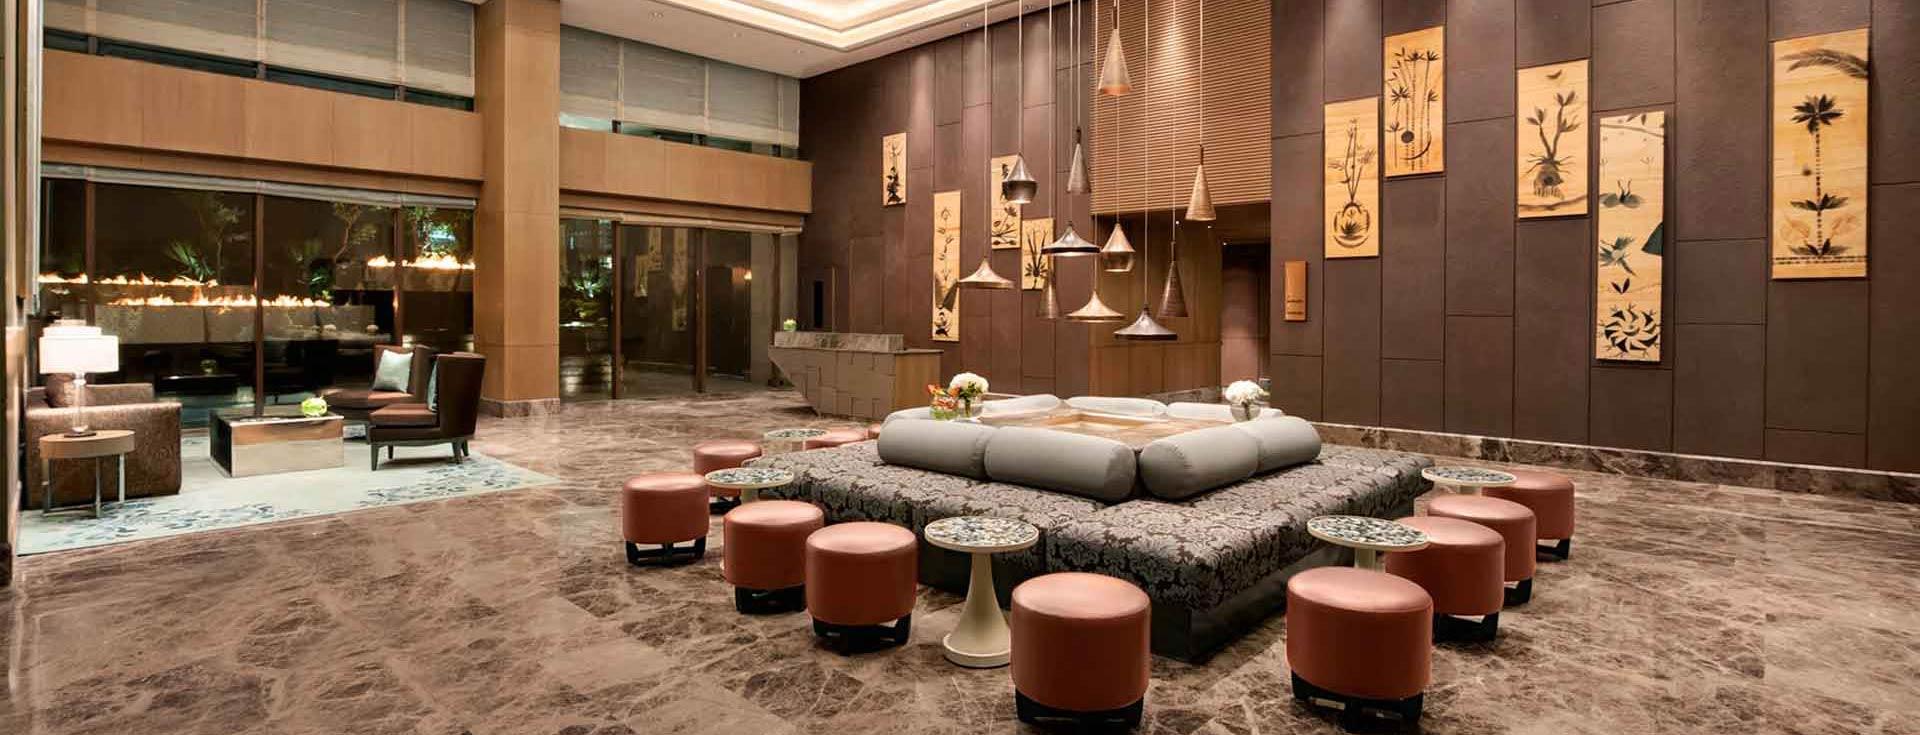 Get your Delhi dose of luxury with The Leela 